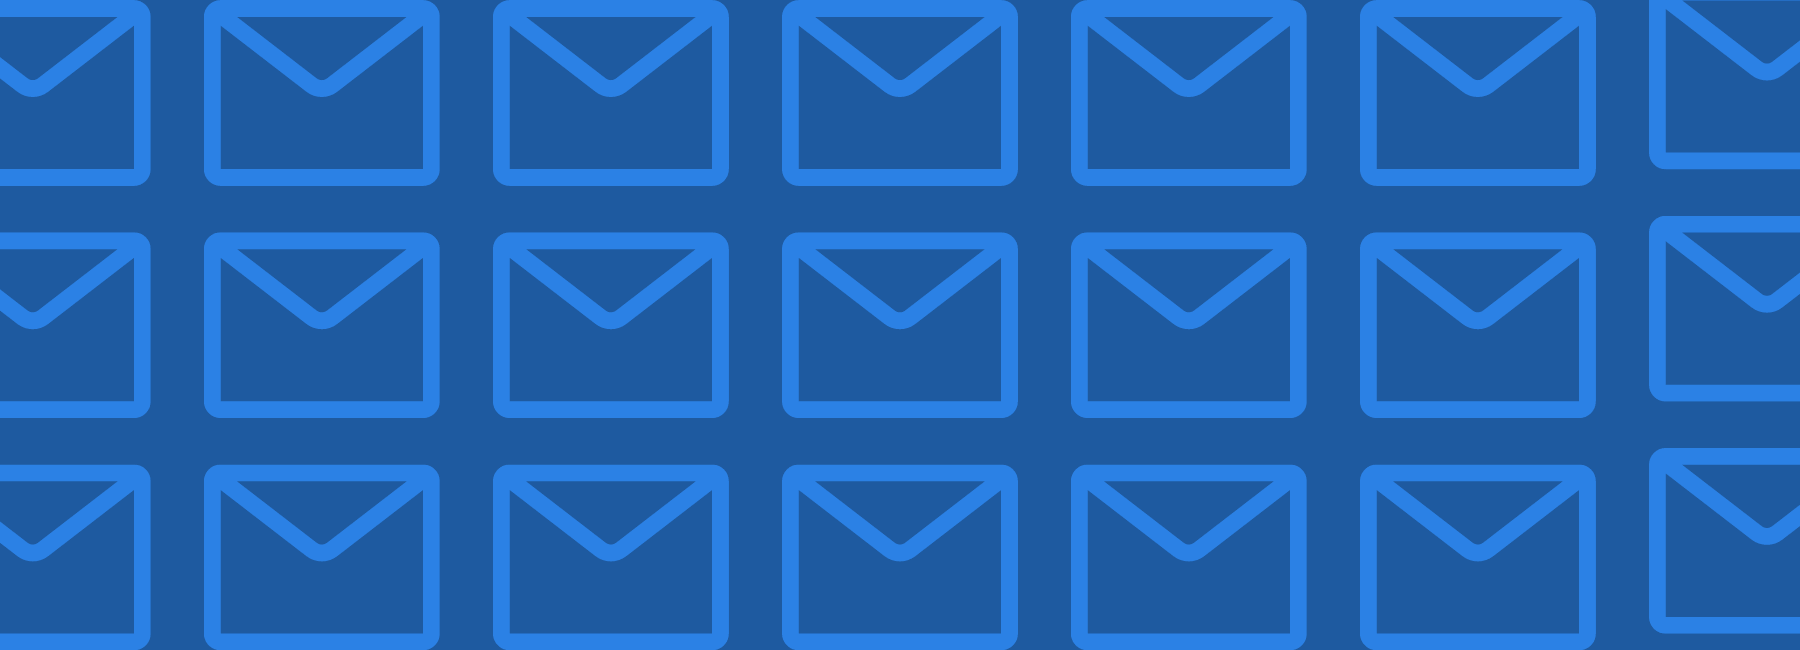 Feedback inbox reimagined: get insights faster than ever